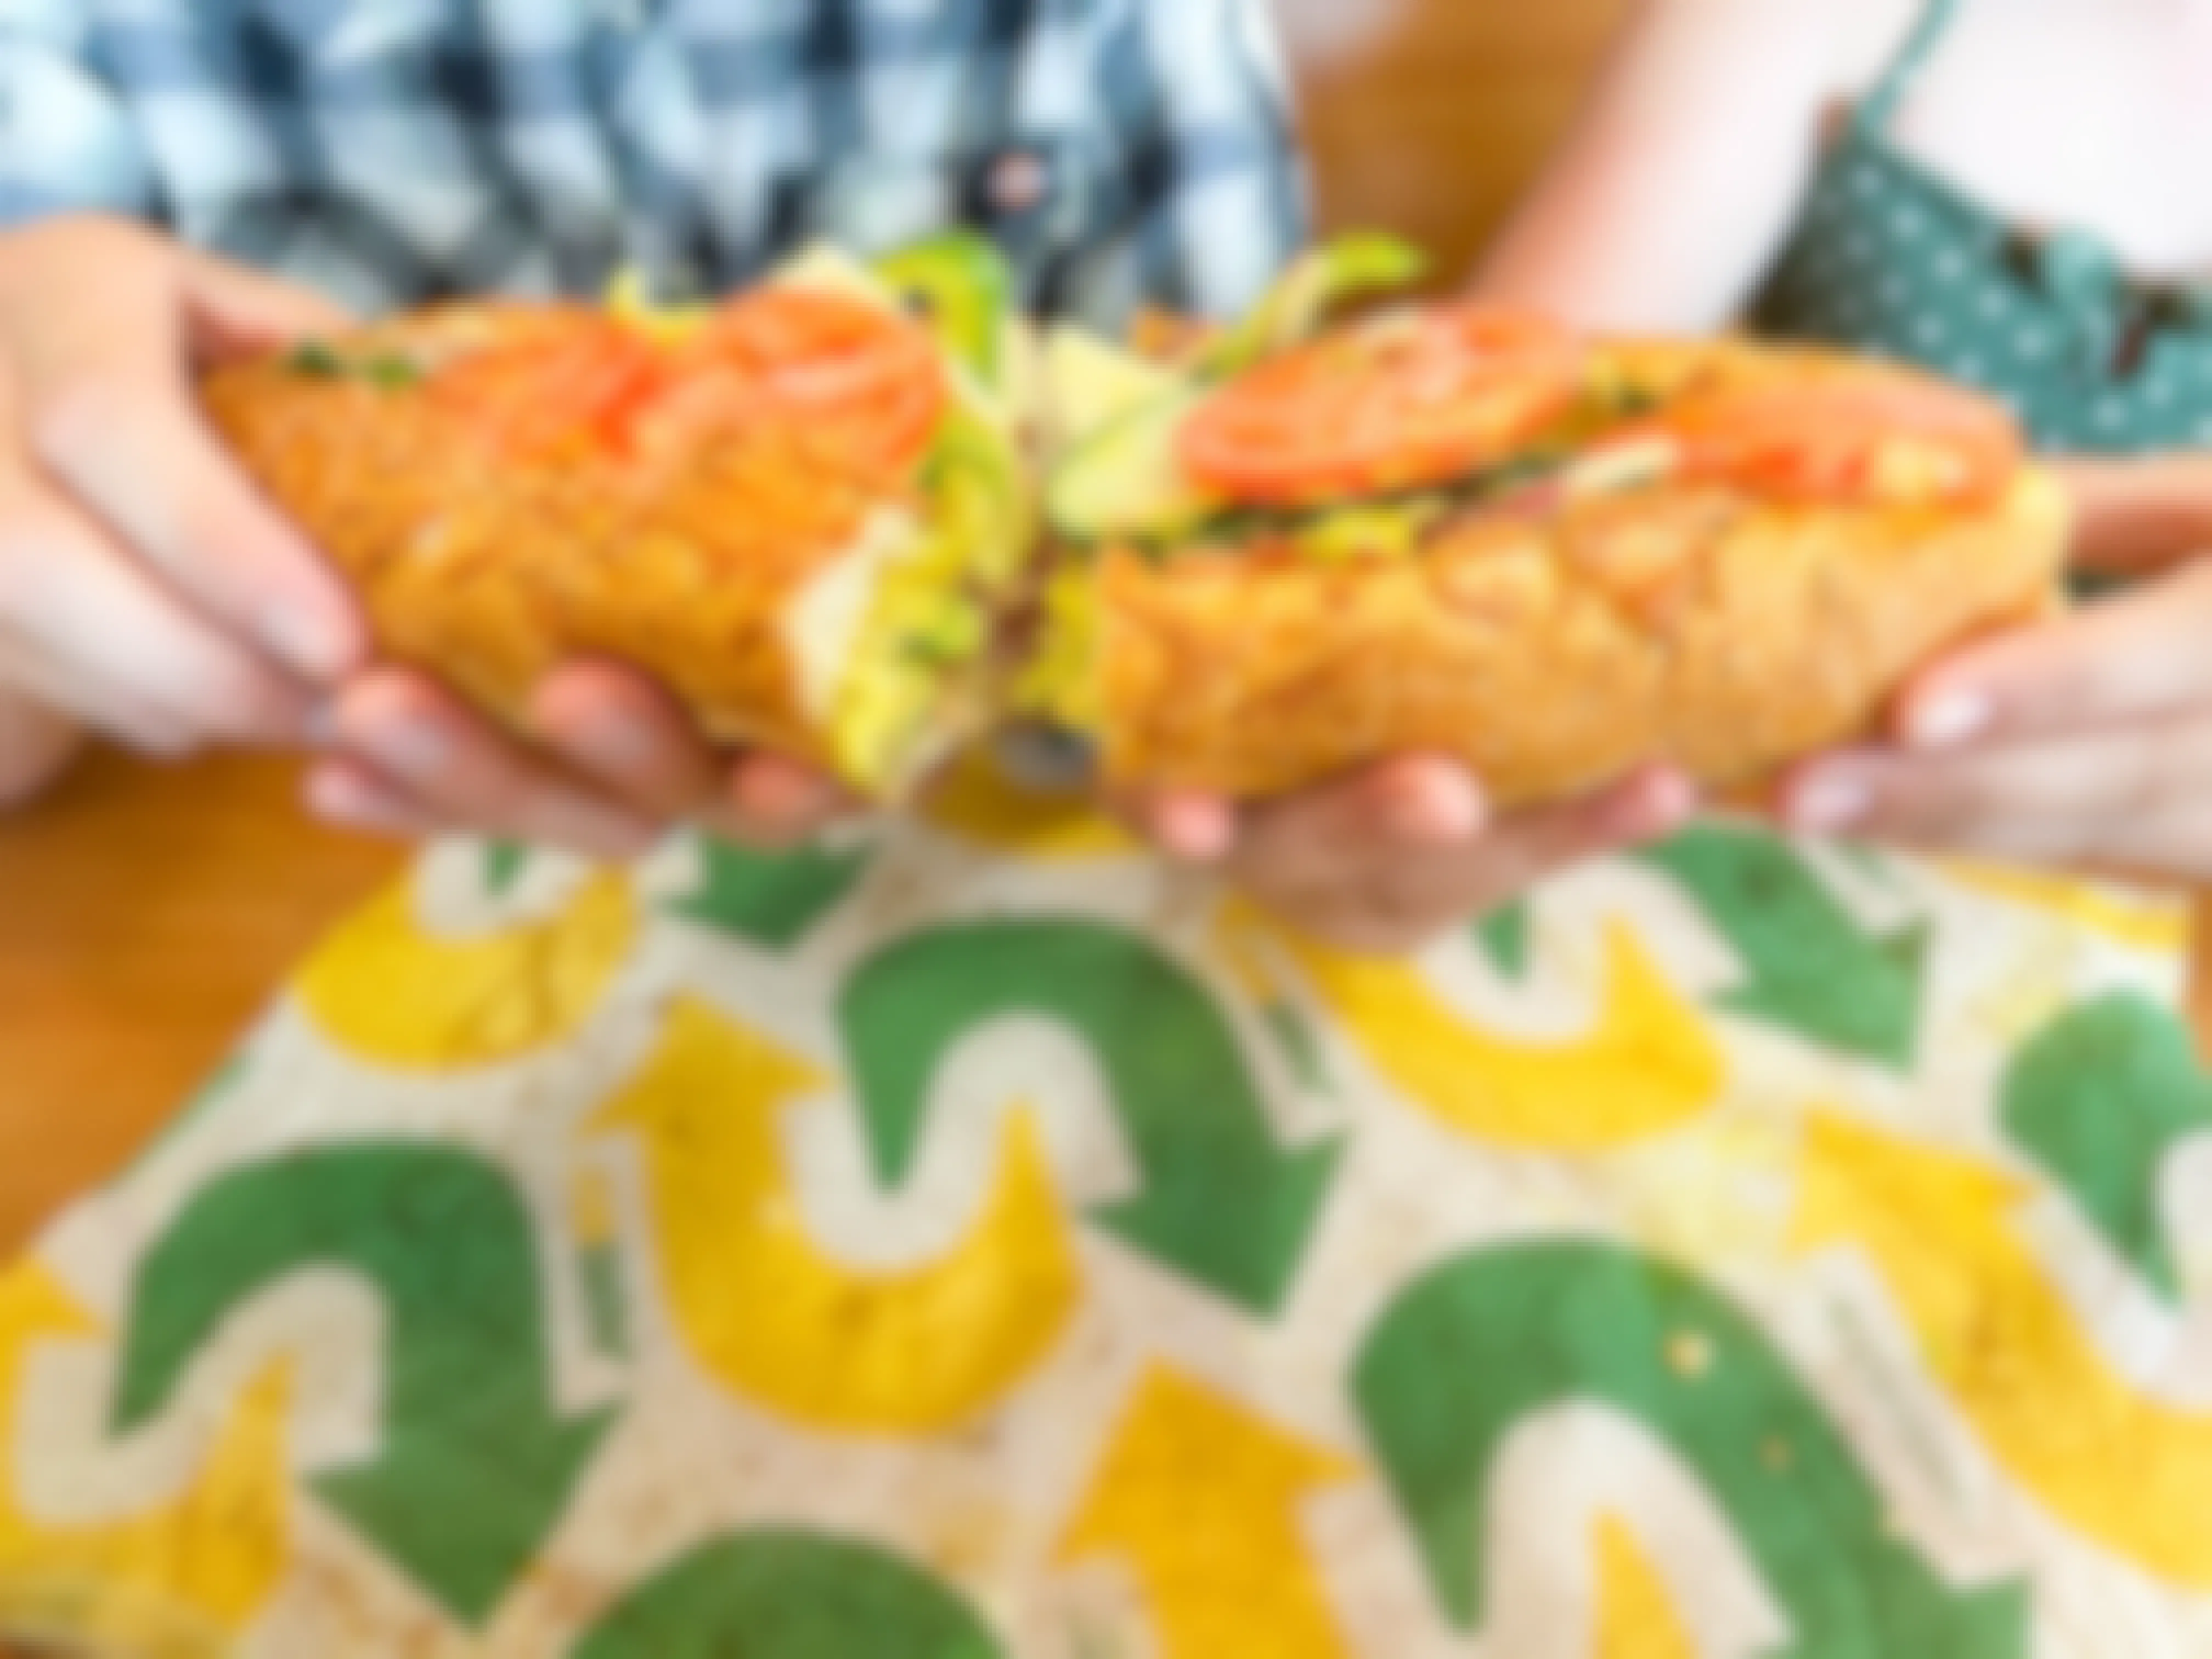 subway footlong with two people holding each half